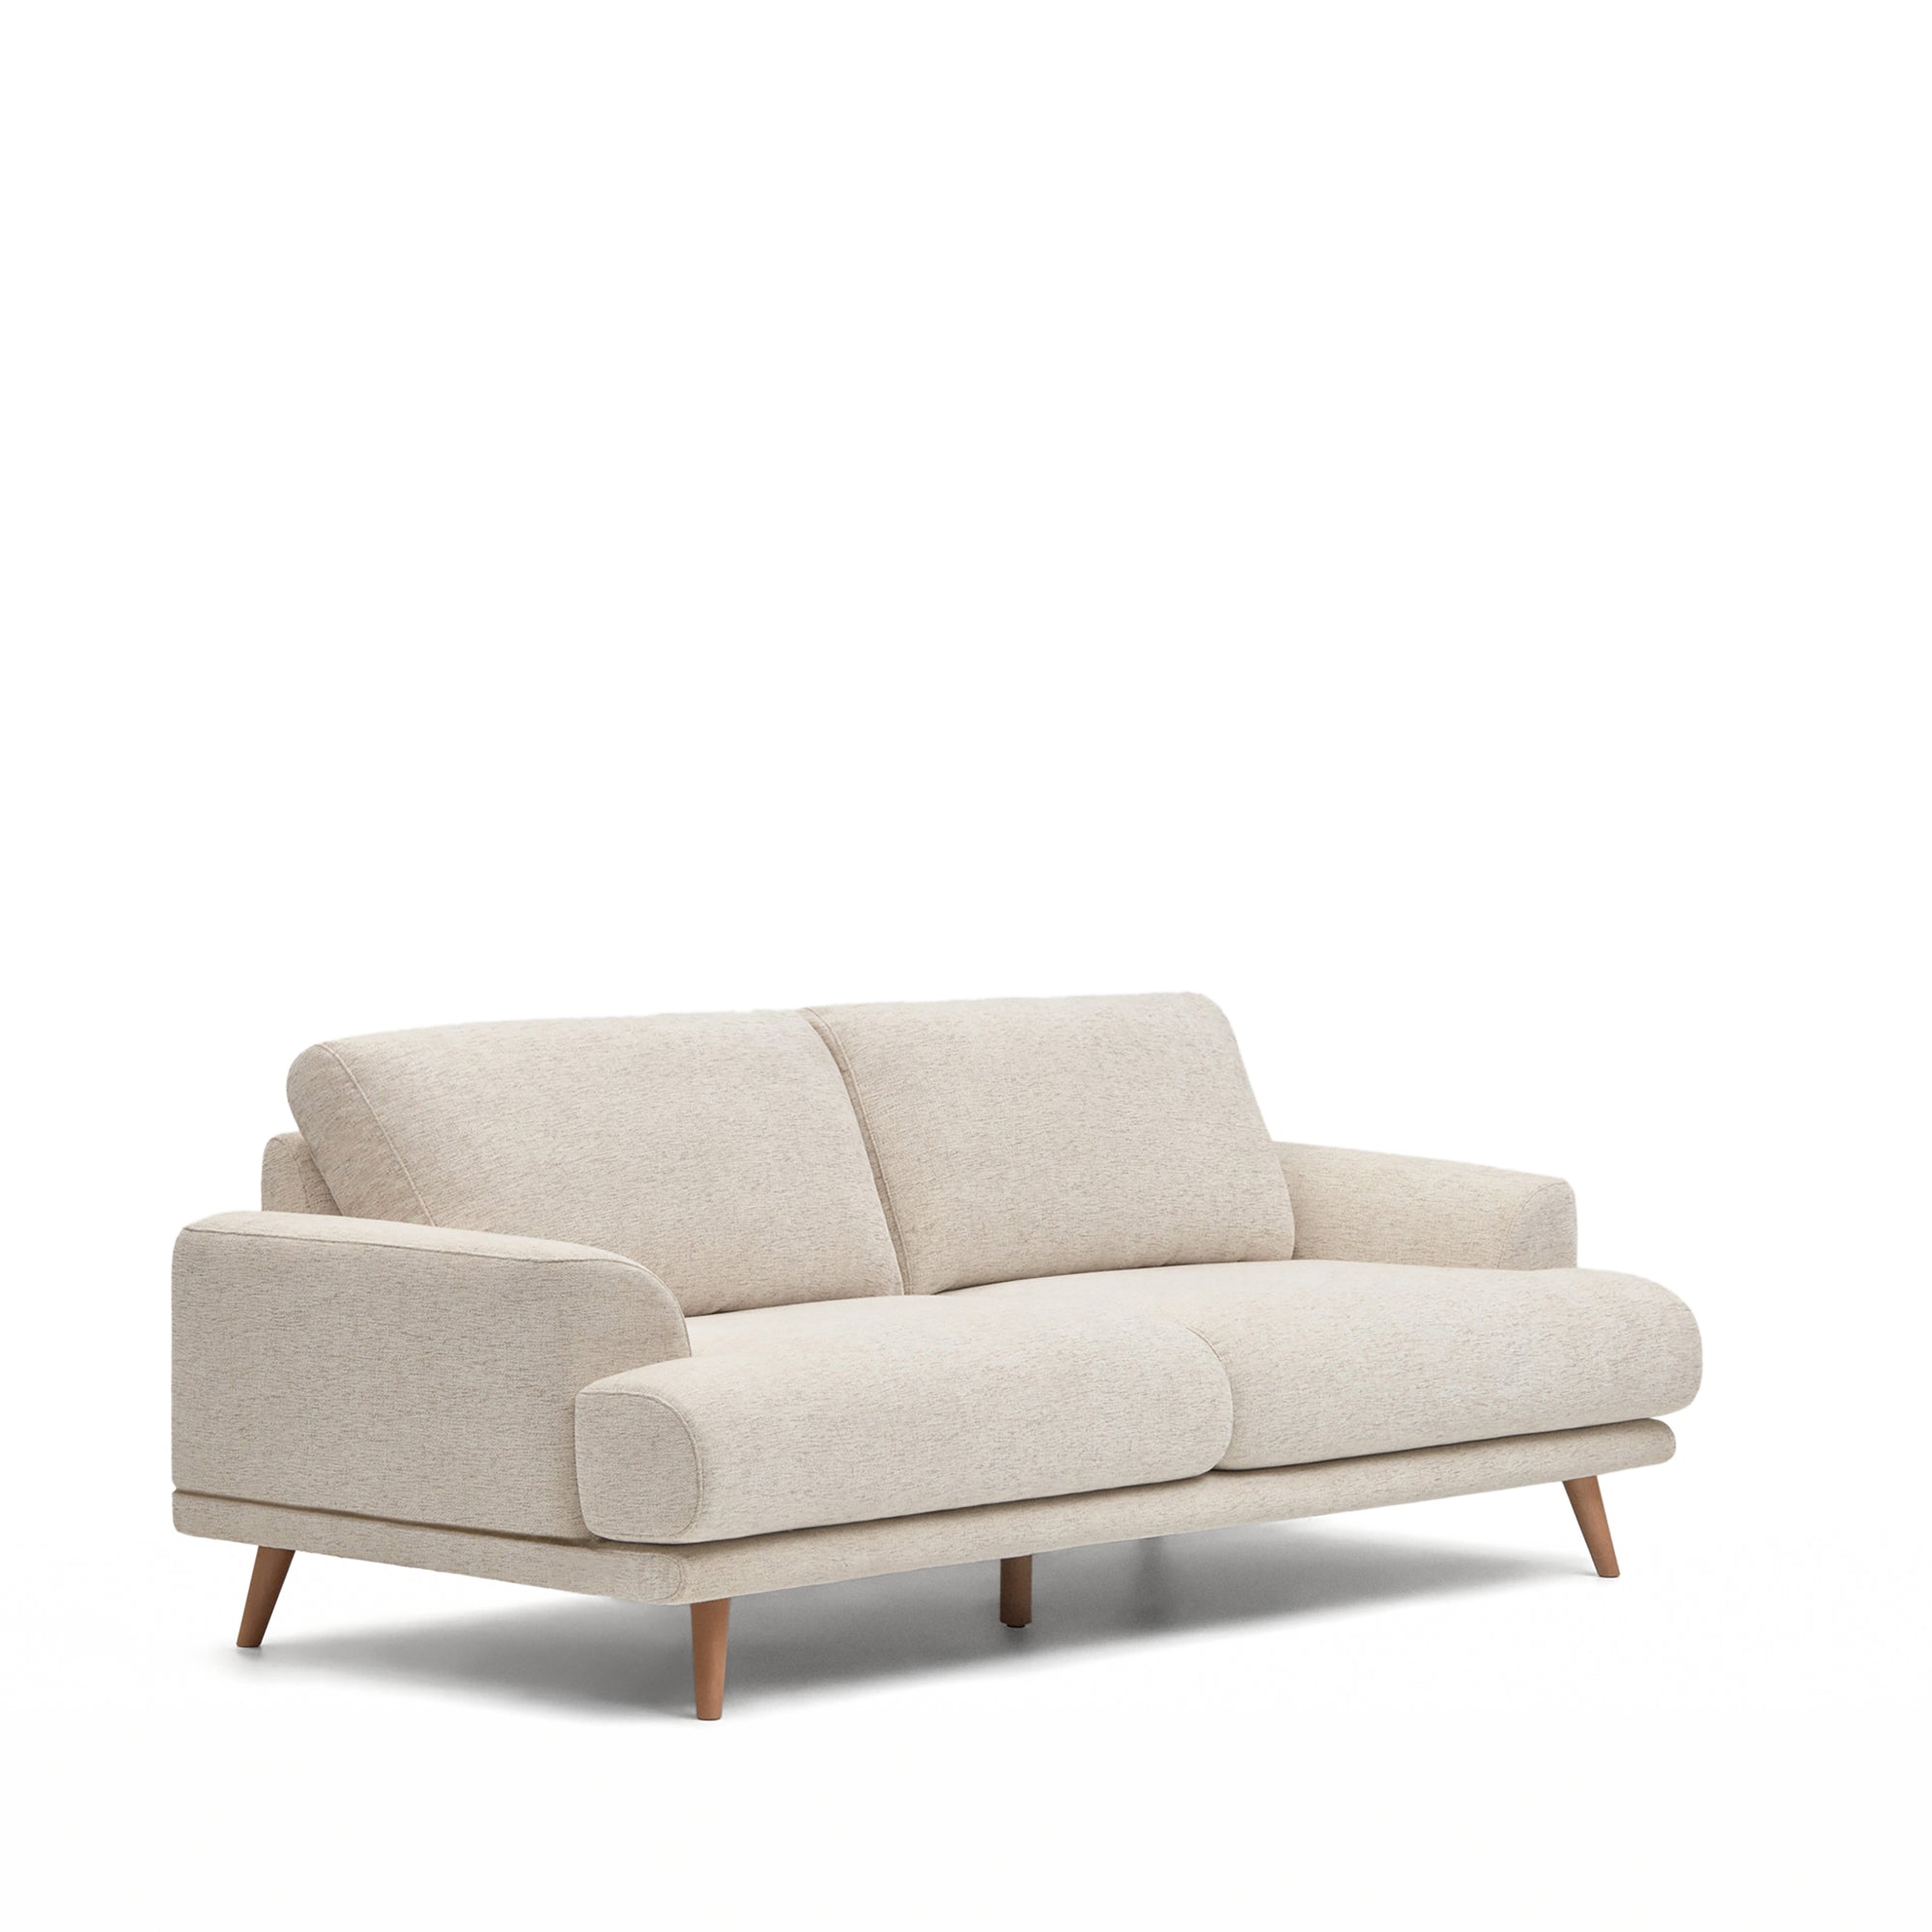 Karin 3 seater sofa in beige with solid beech wood legs, 231 cm